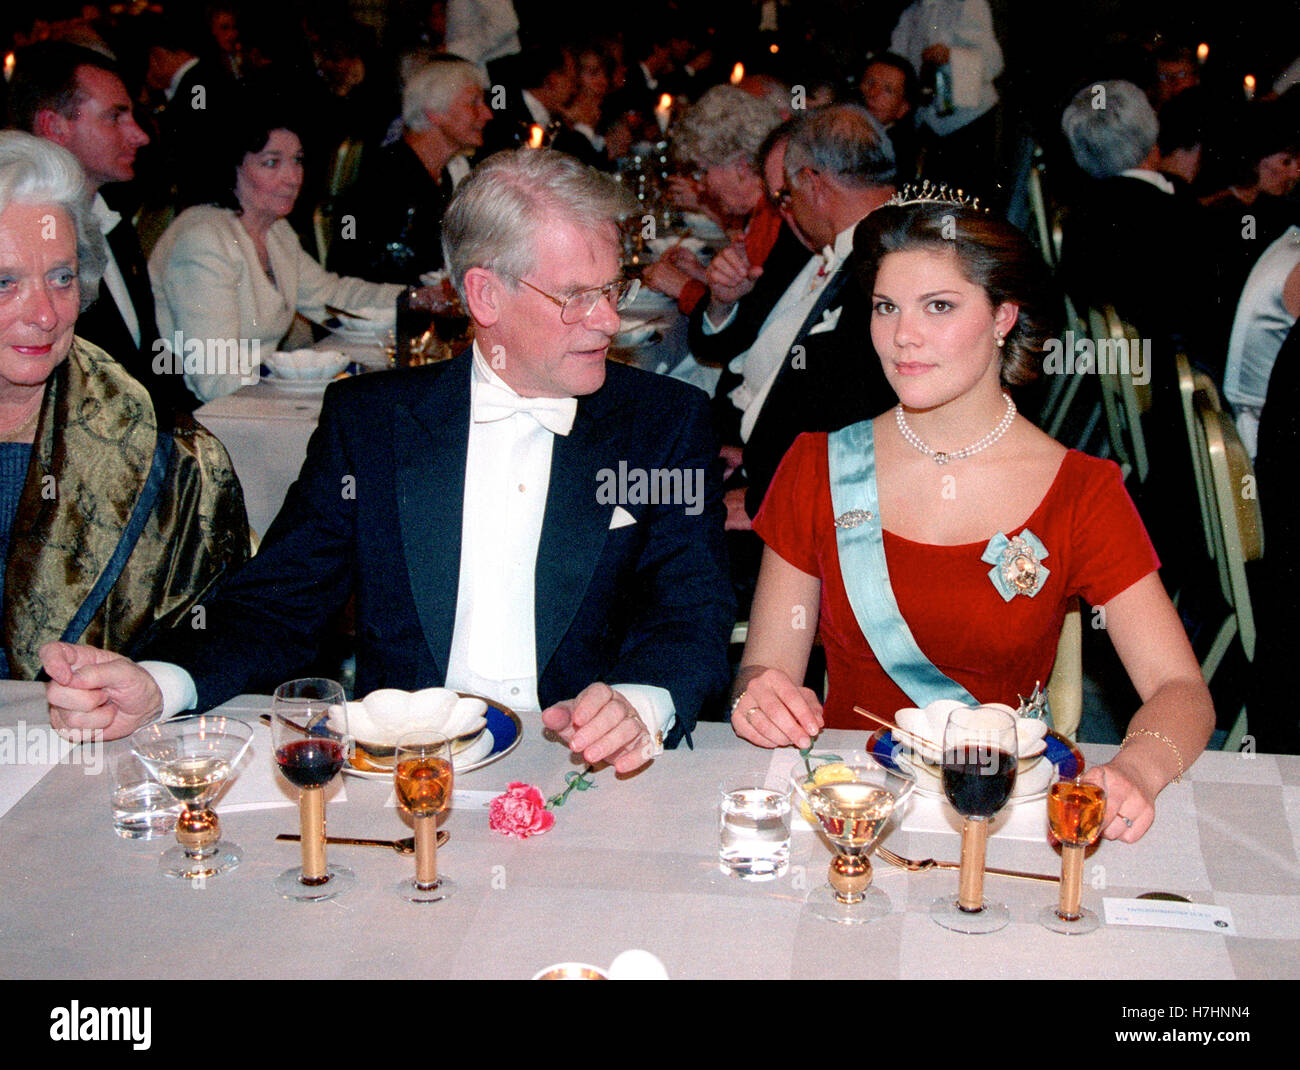 Swedish CROWN PRINCESS VICTORIA at Nobel banquet together with Swedish Prime minister Ingvar Carlsson at the dinner table Stock Photo